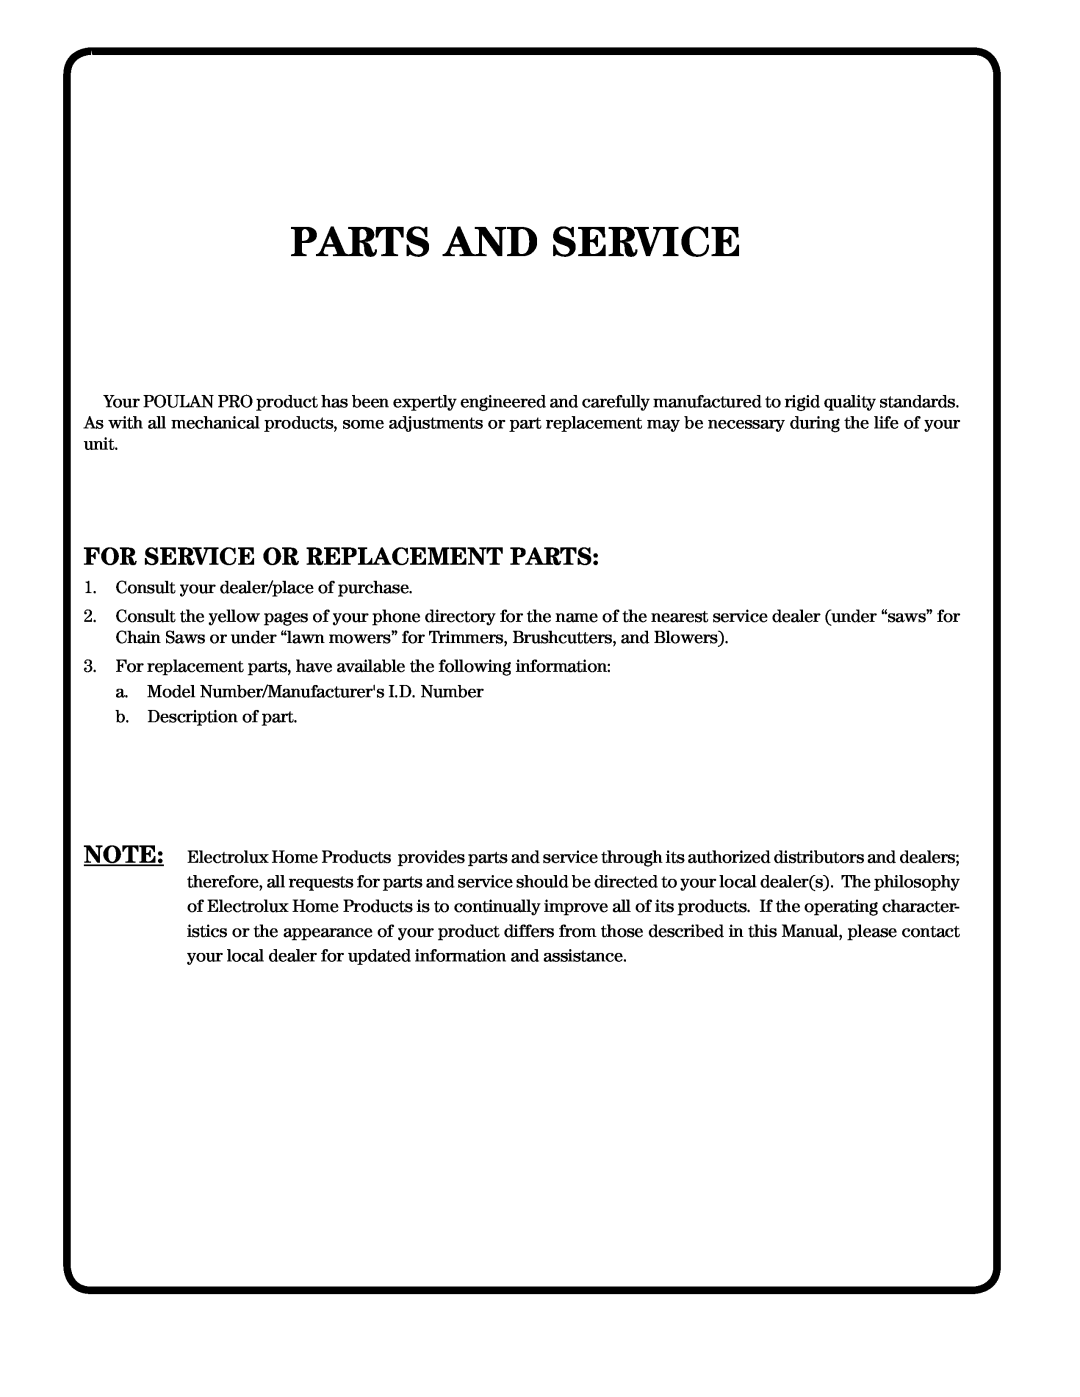 Poulan PRRT65B owner manual Parts And Service, For Service Or Replacement Parts 